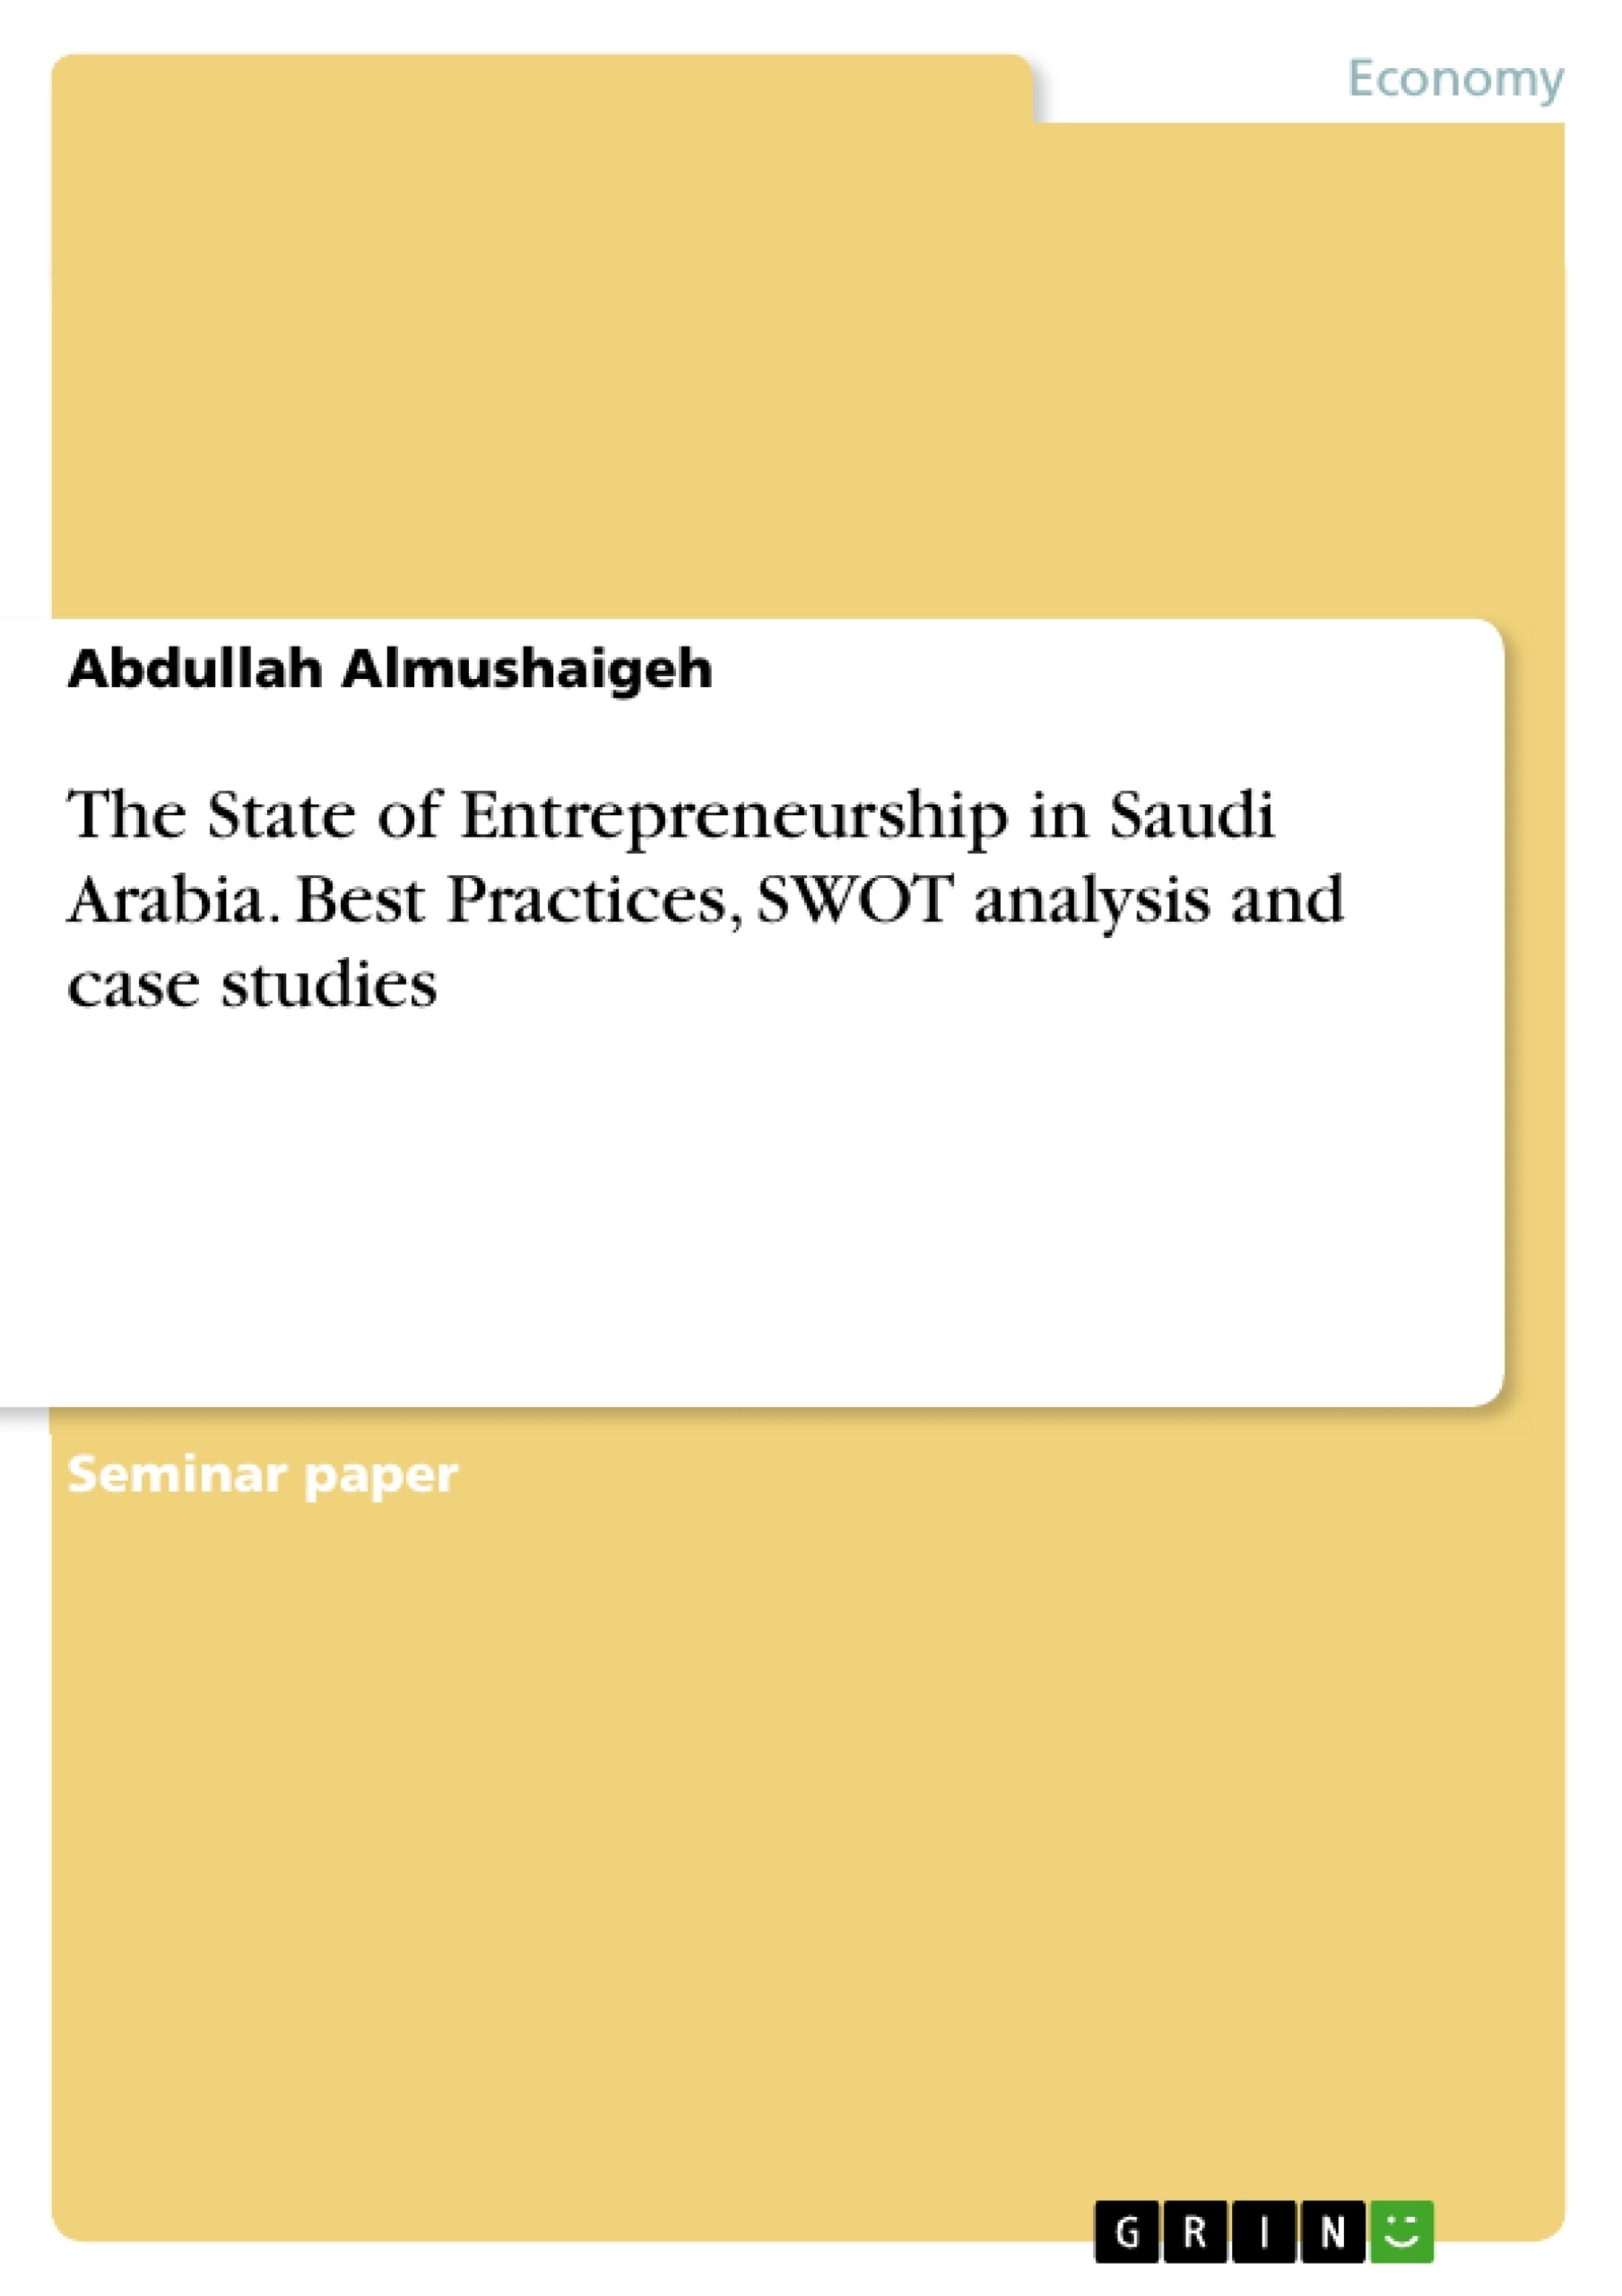 Titre: The State of Entrepreneurship in Saudi Arabia. Best Practices, SWOT analysis and case studies